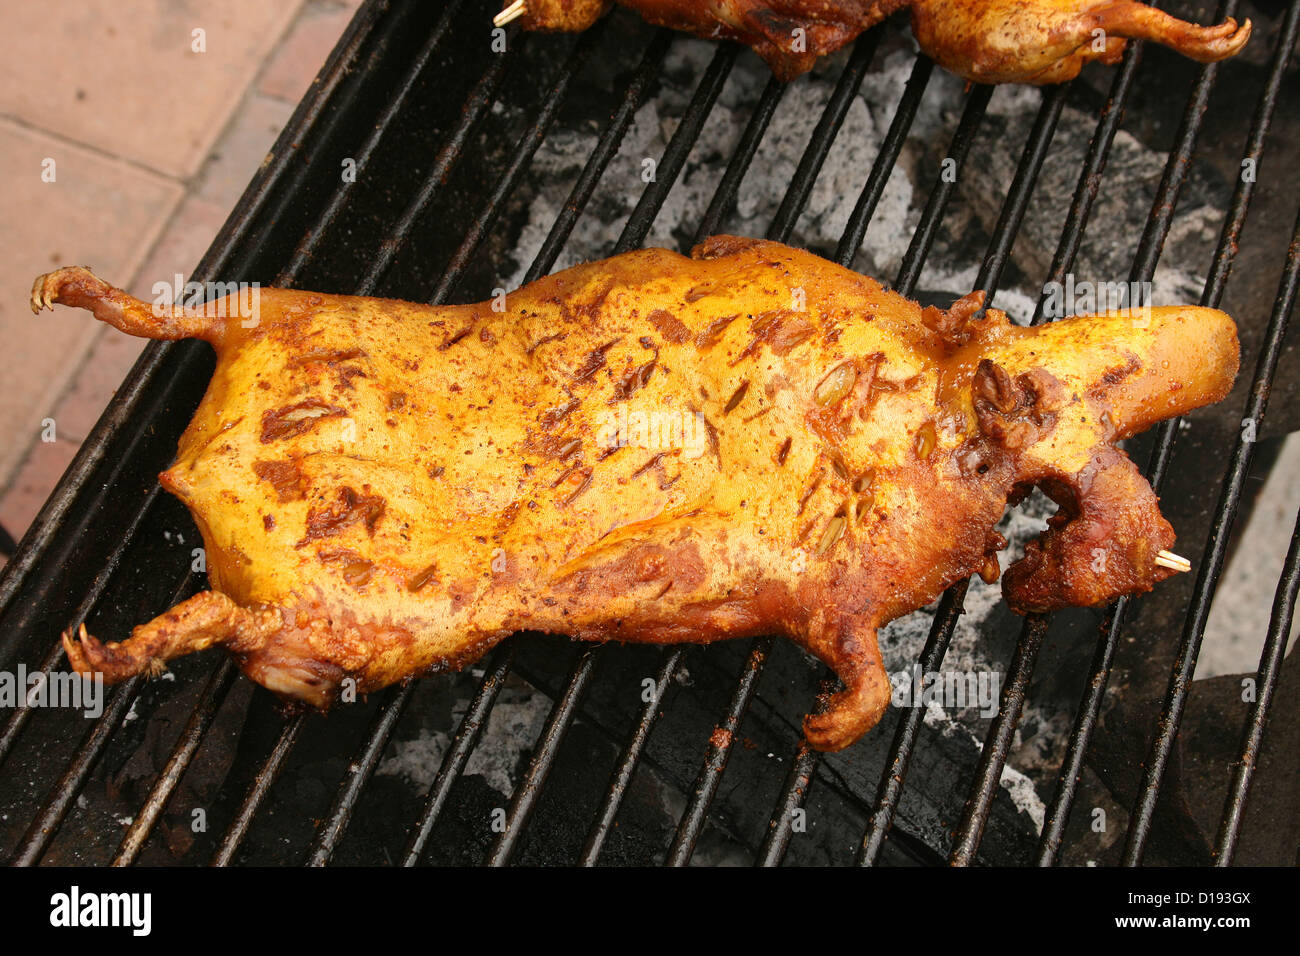 Roasted Cuy or Guinea Pig split, seasoned and roasting over coals is a local delicacy in Cotacachi, Ecuador Stock Photo